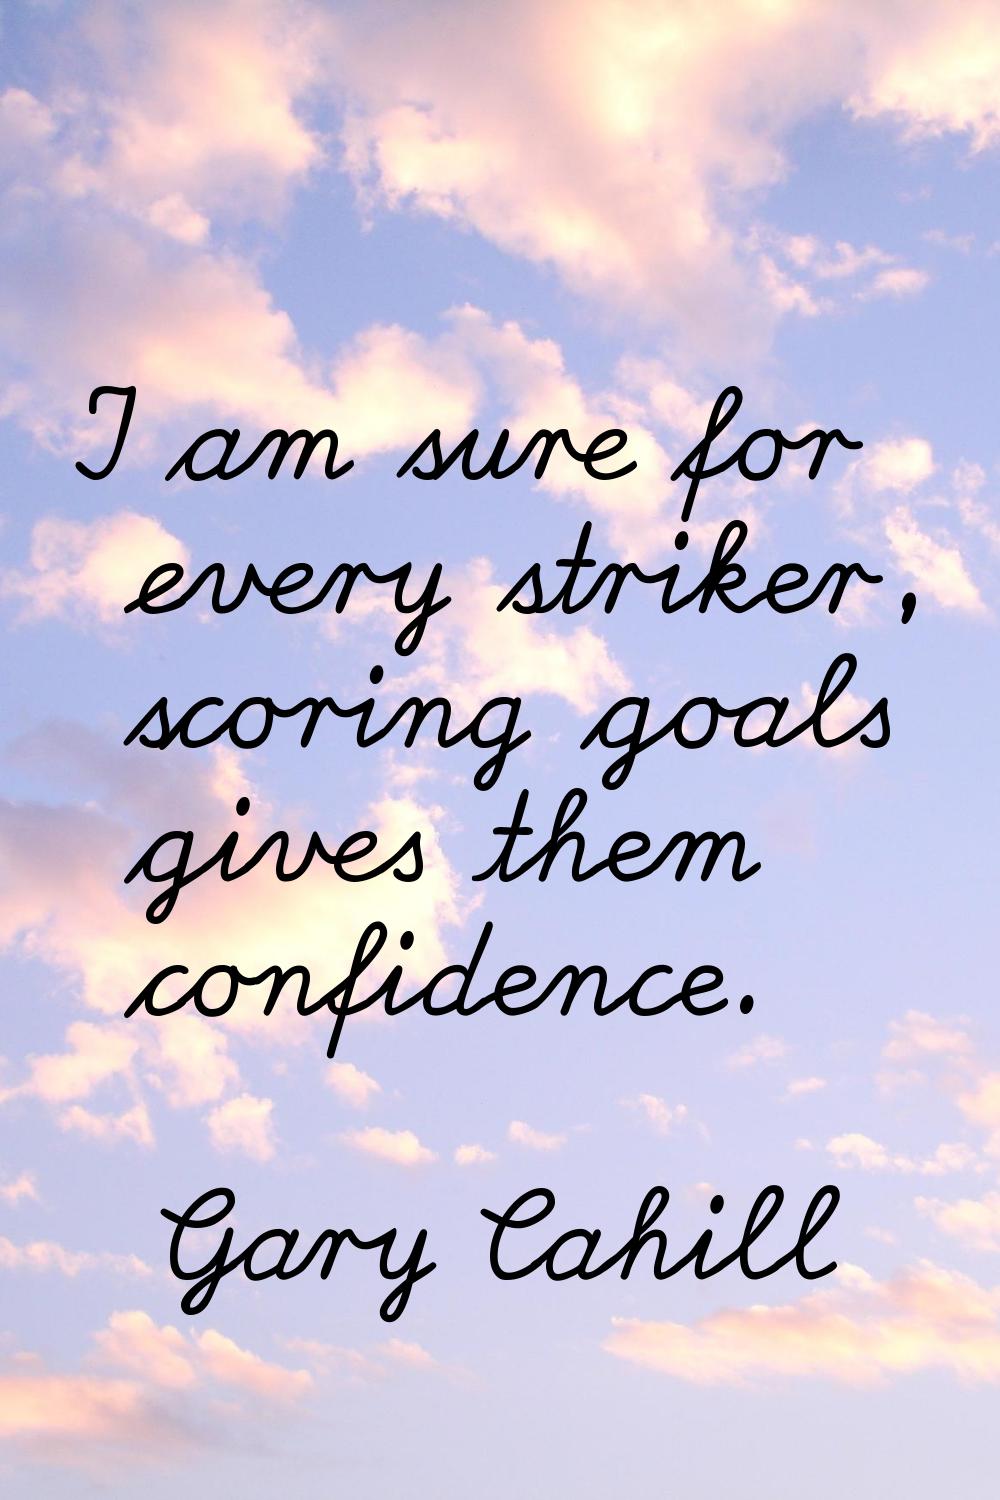 I am sure for every striker, scoring goals gives them confidence.